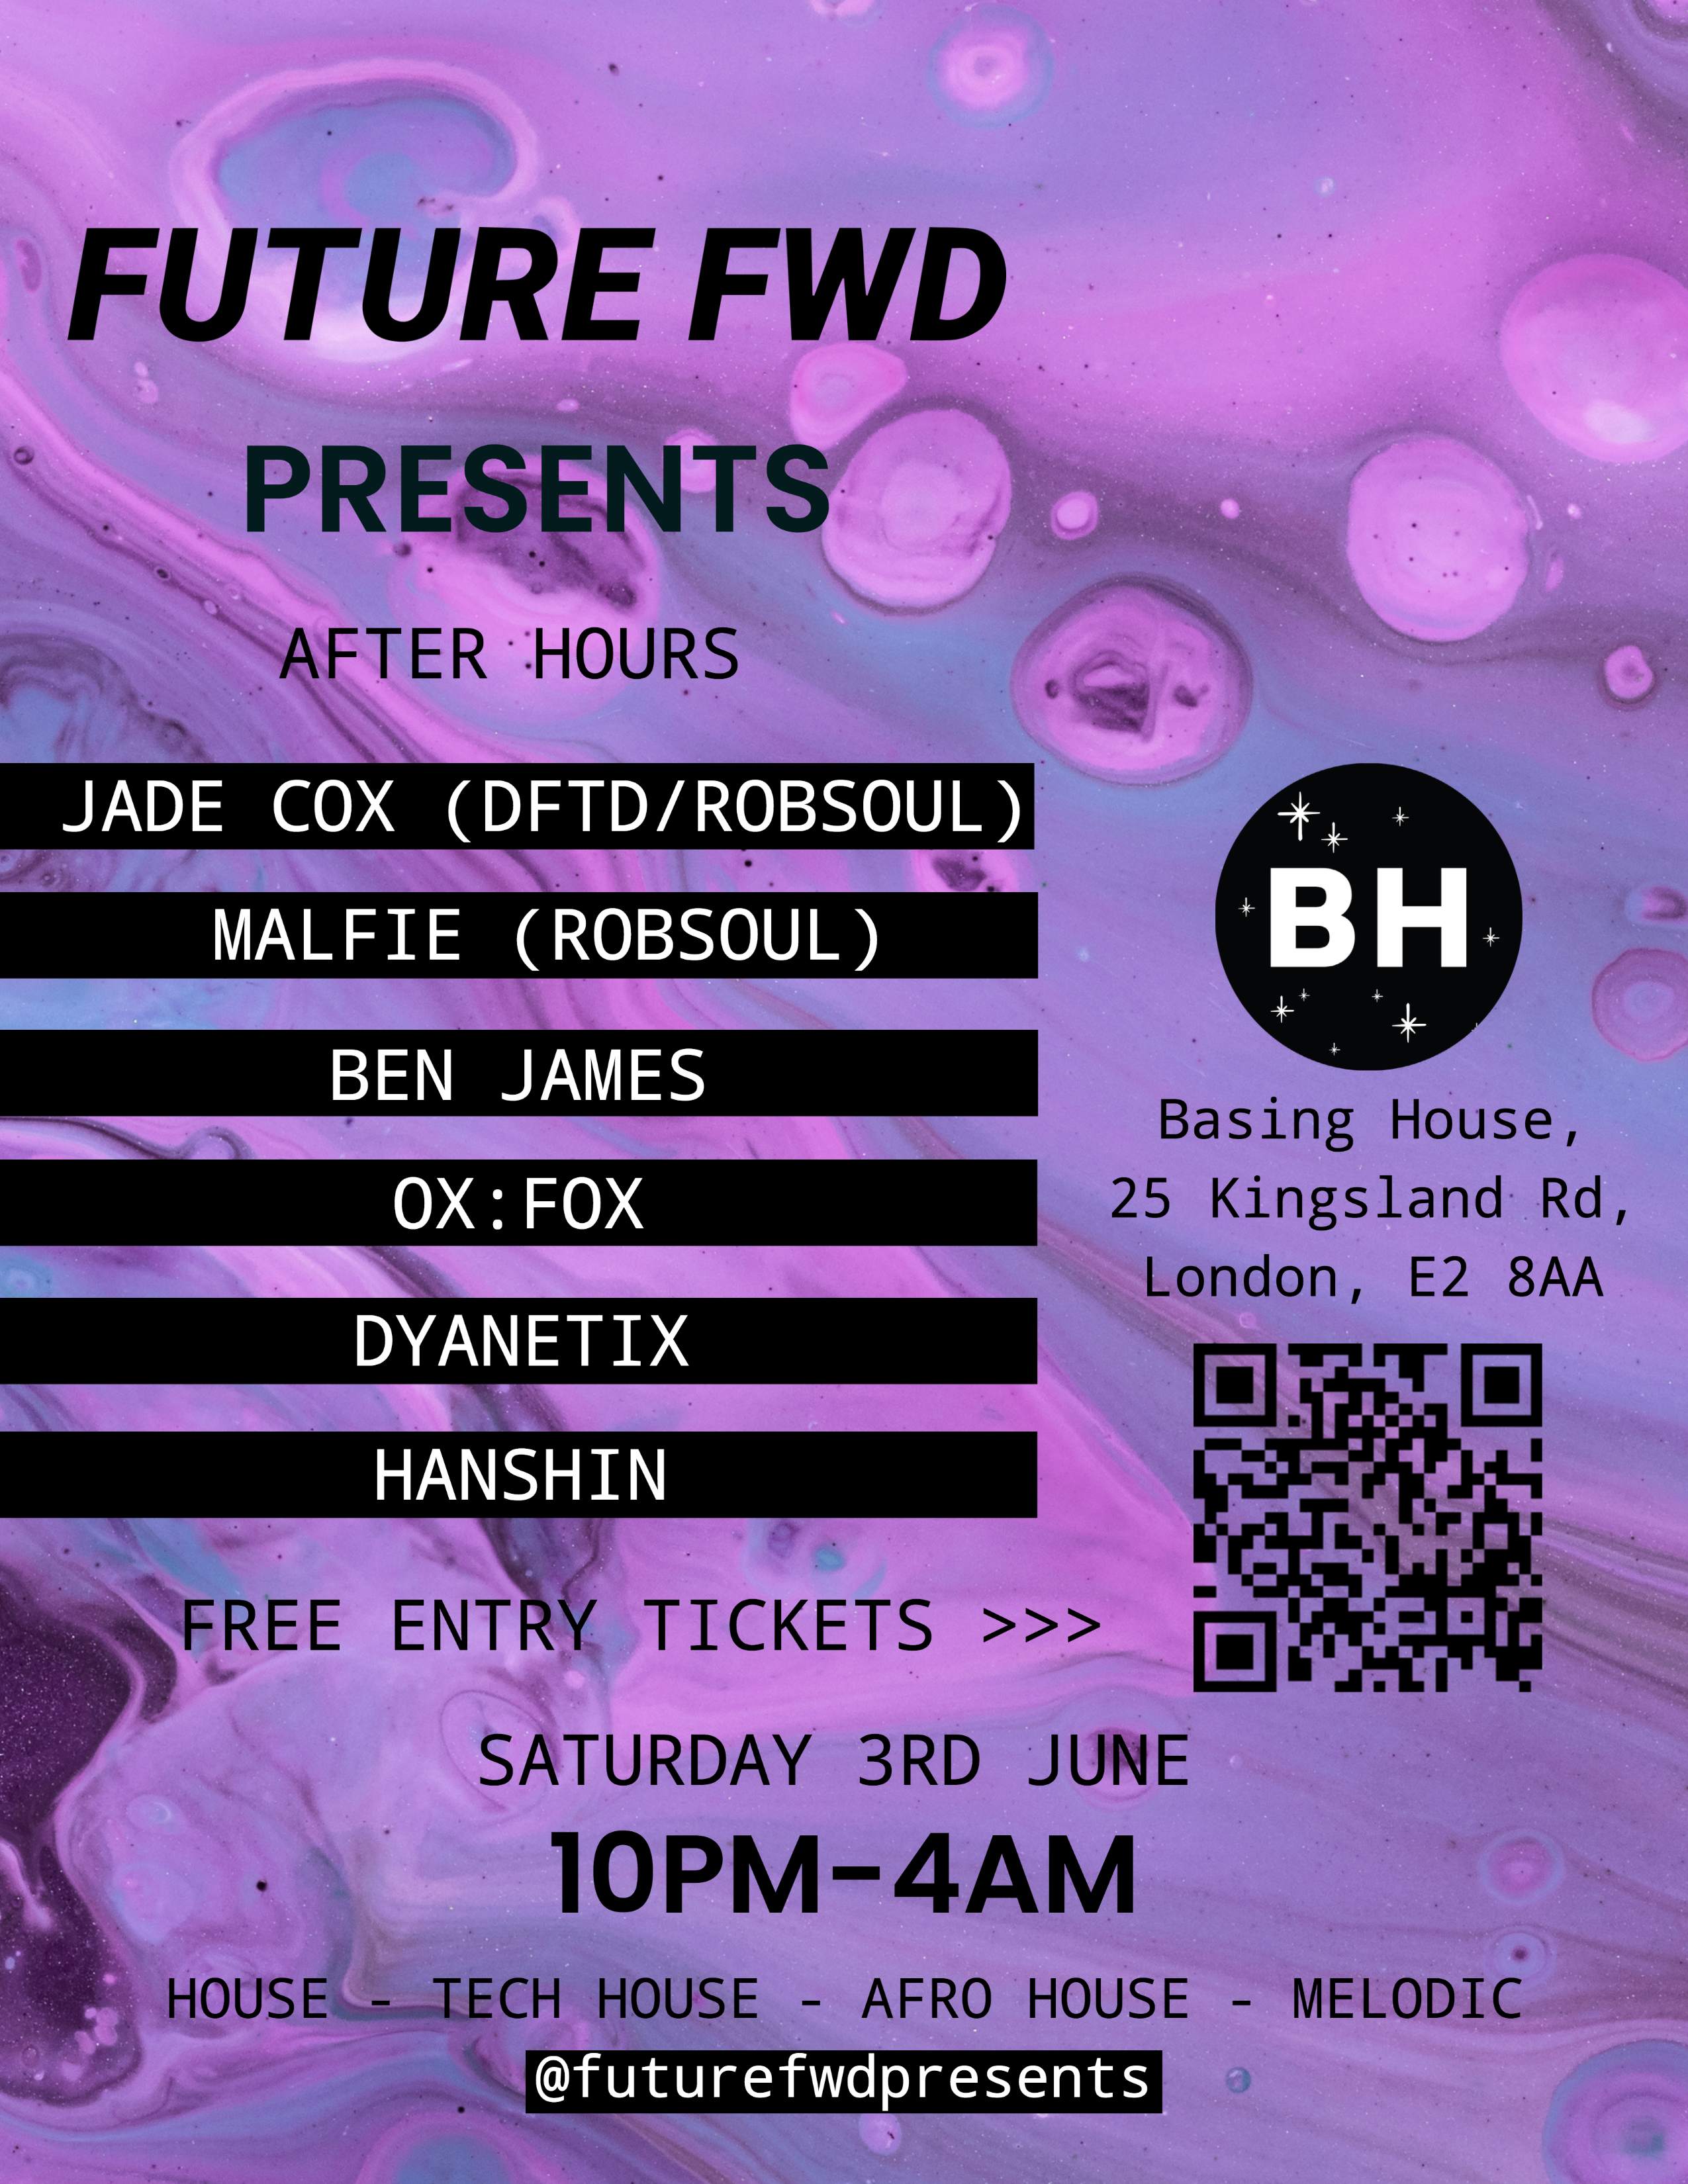 FUTURE FWD PRESENTS: AFTER HOURS W/ Jade Cox (DFTD,ROBSOUL) - FREE ENTRY VIA RA - Página frontal